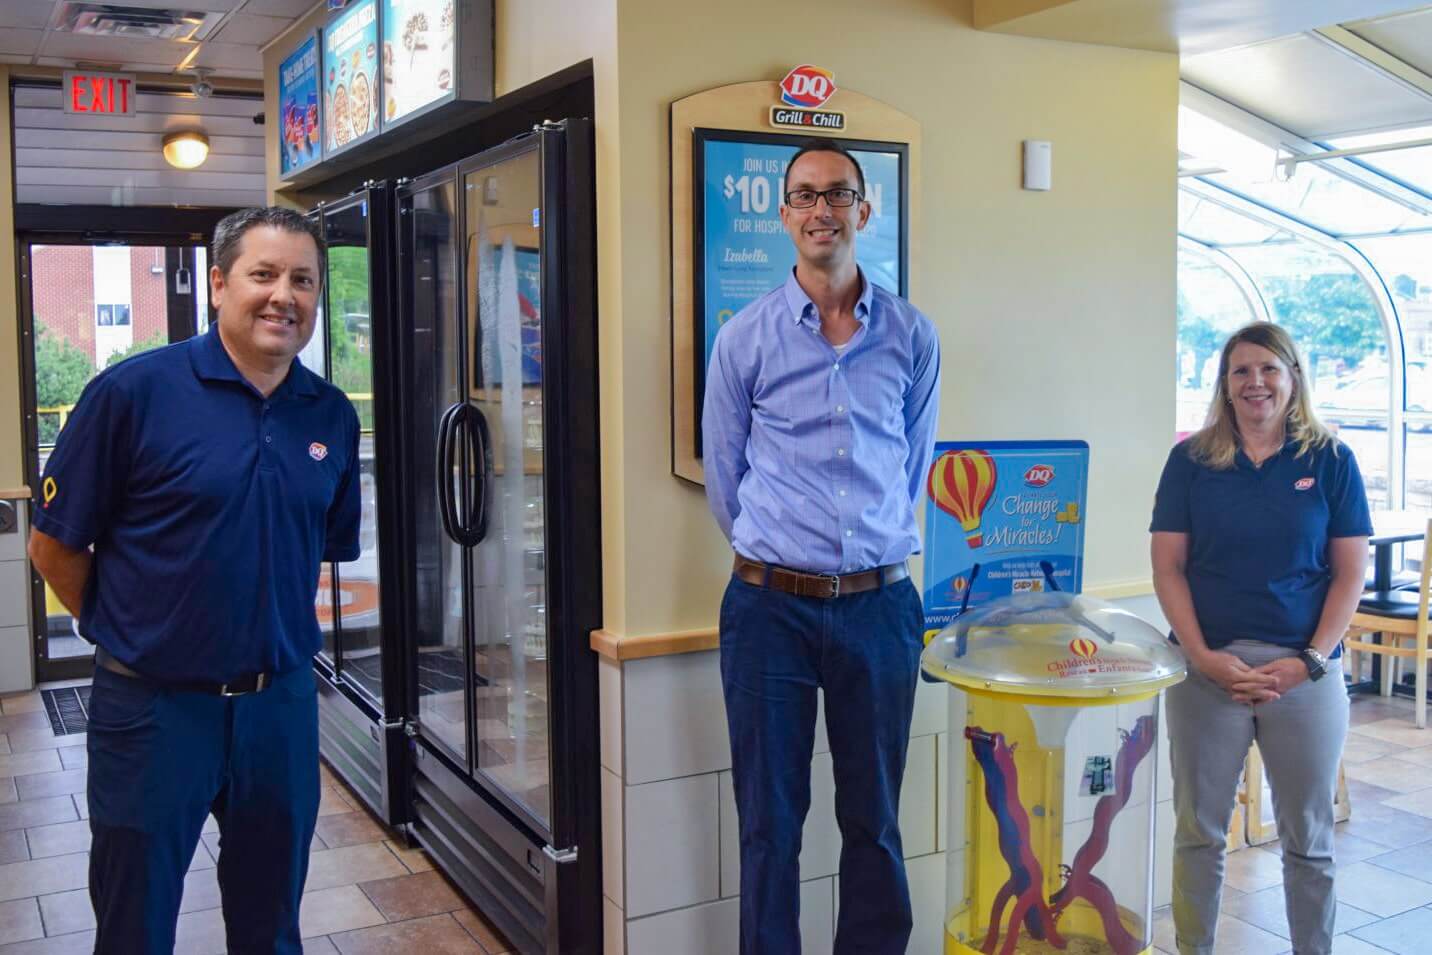 Peter White, EVP of DQ, Nolan Quinn, owner of Dairy Queen Cornwall, and Candida Ness, Senior Director of Marketing